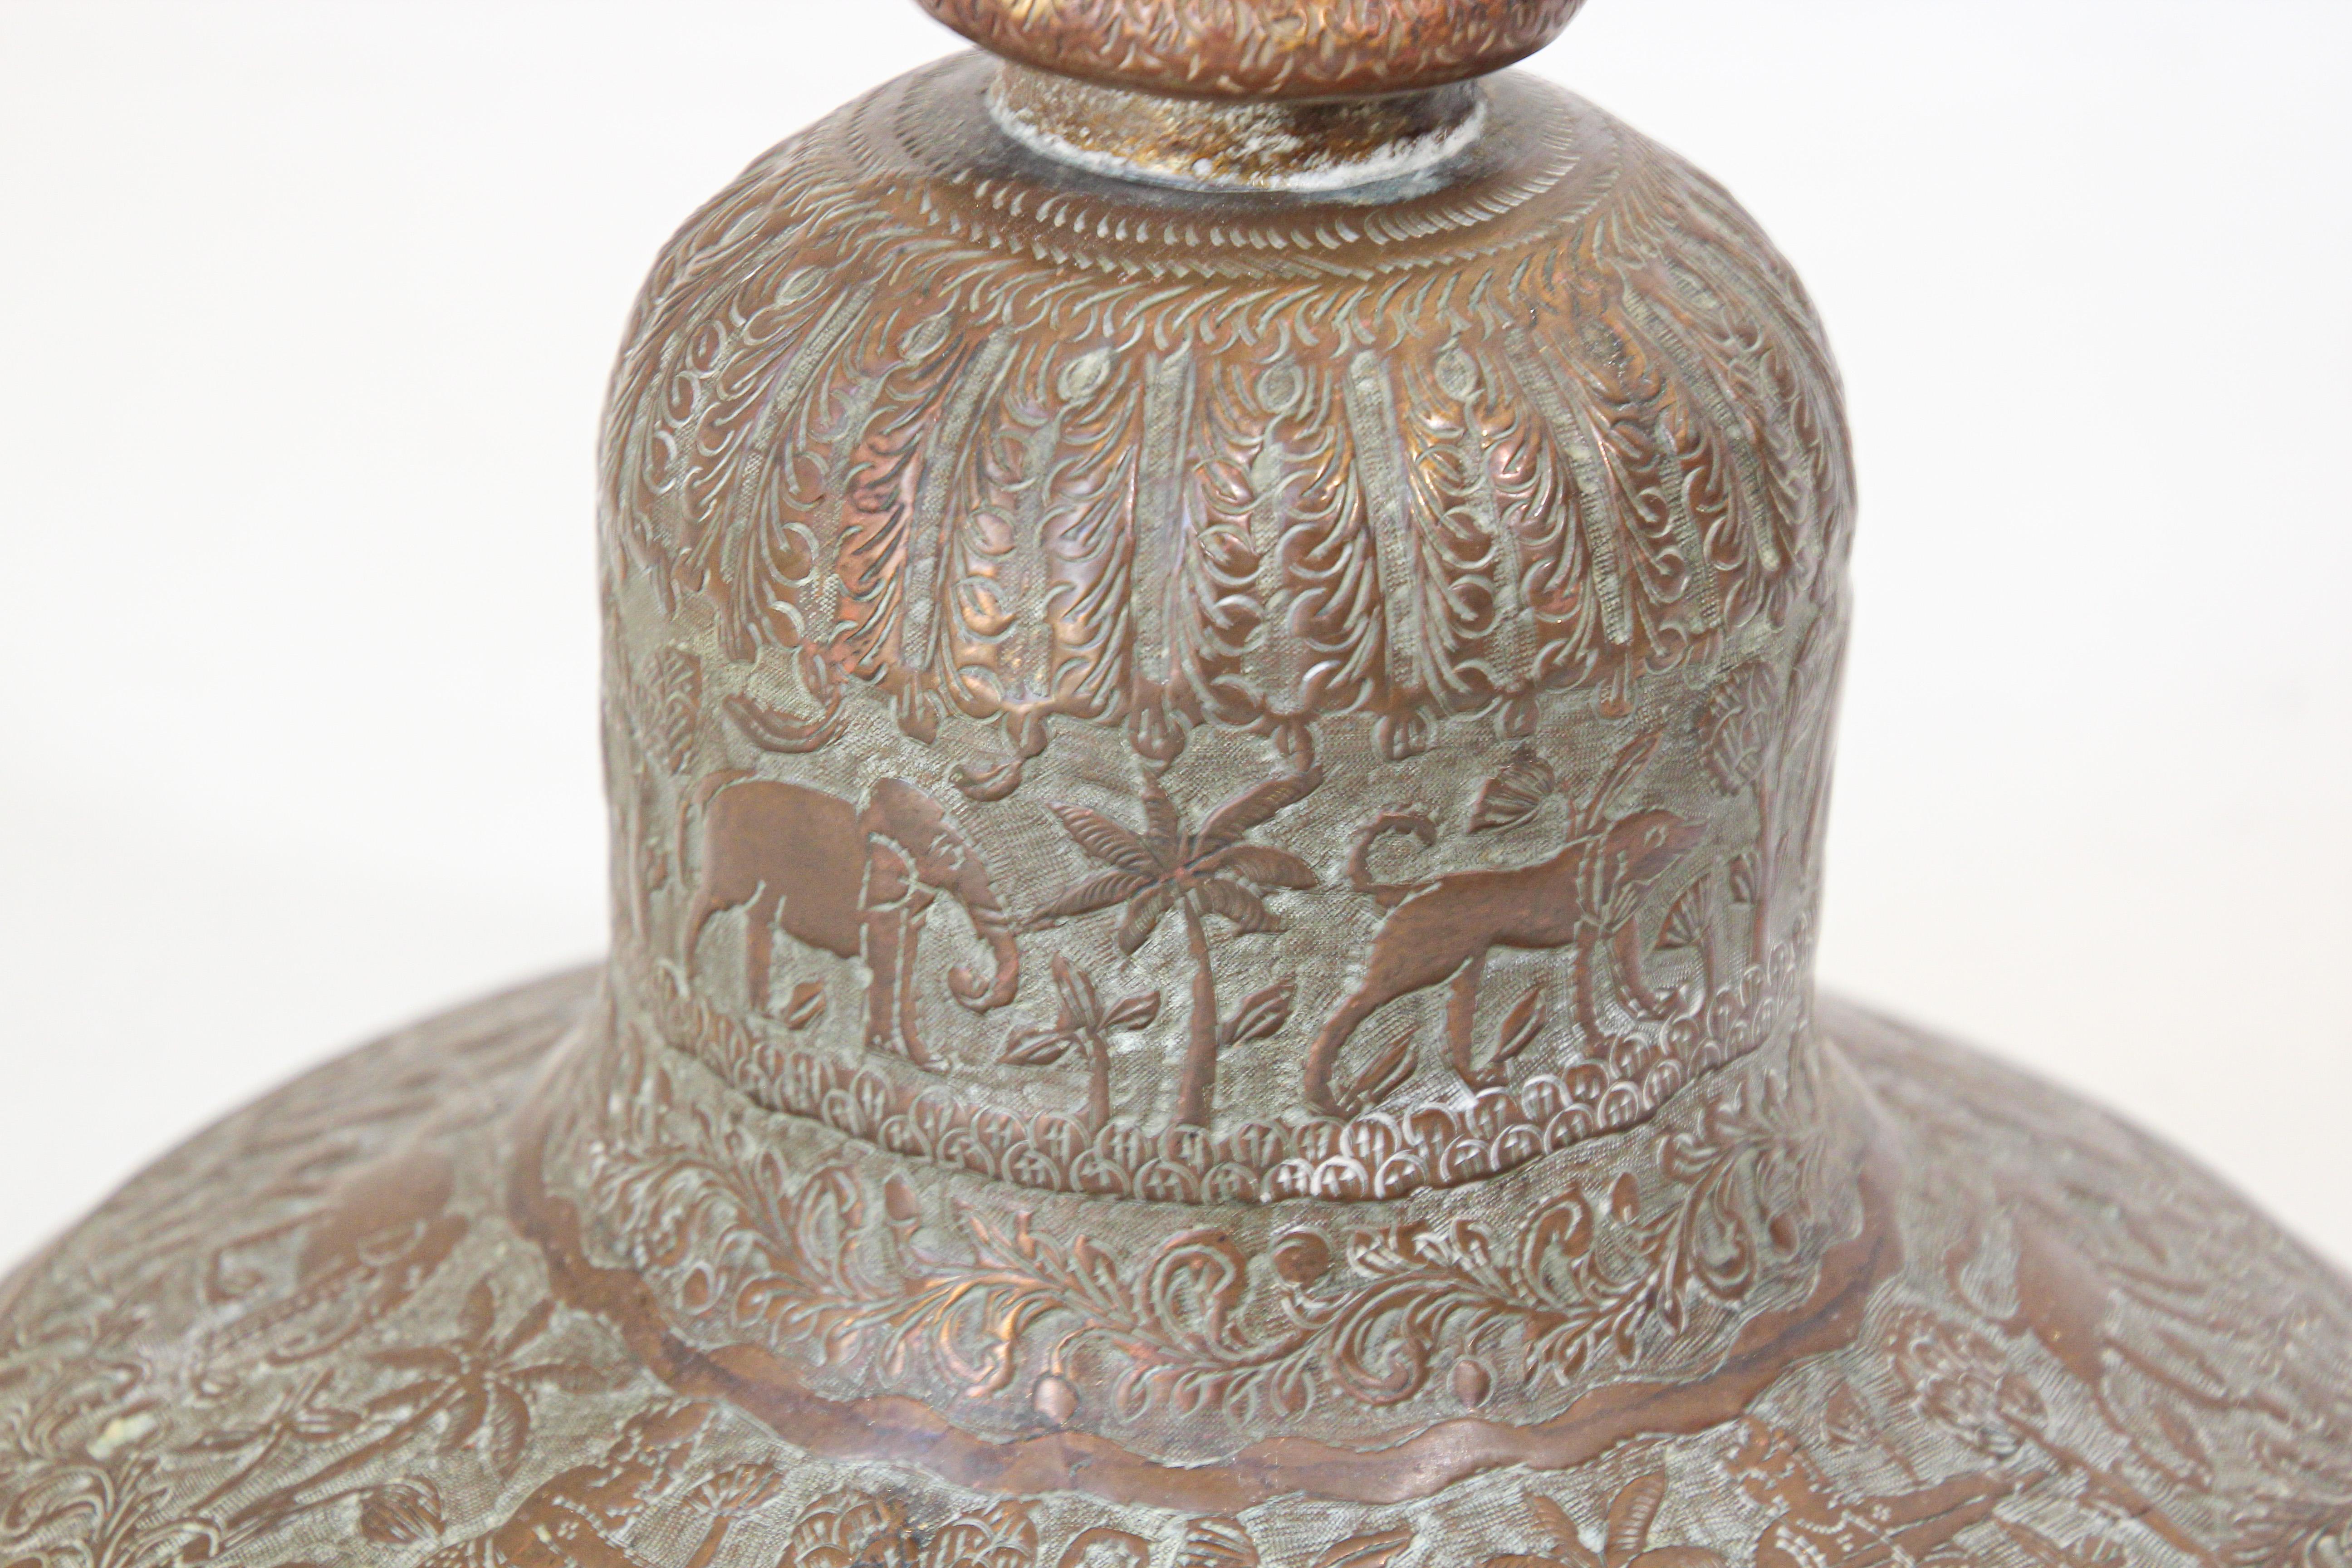 Hand-Carved Antique Copper Vase with Hindu Scenes, 19th Century For Sale